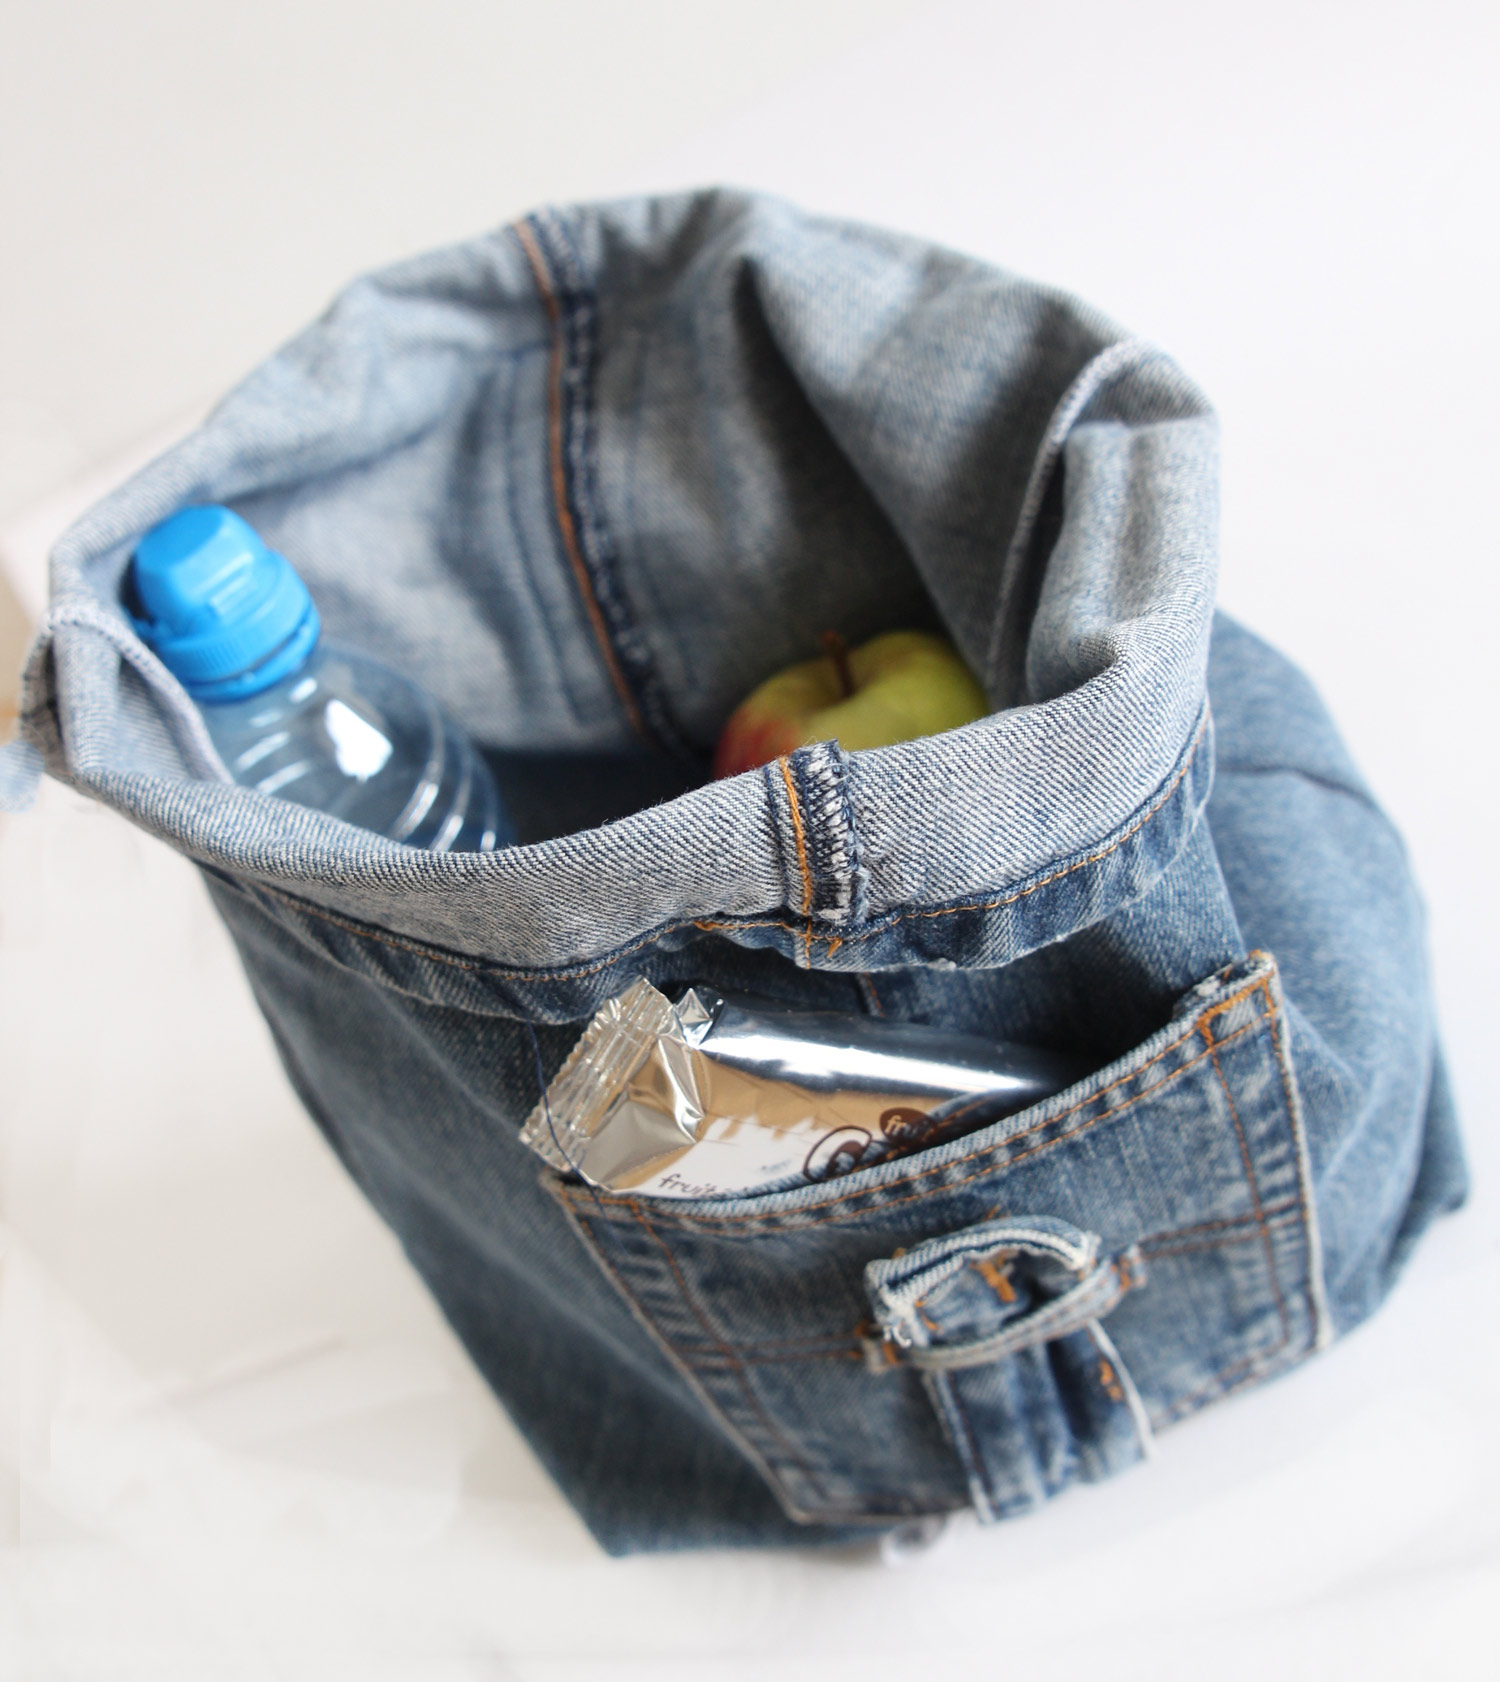 Lunchbag with old jeans - upcycling - Made by Emy